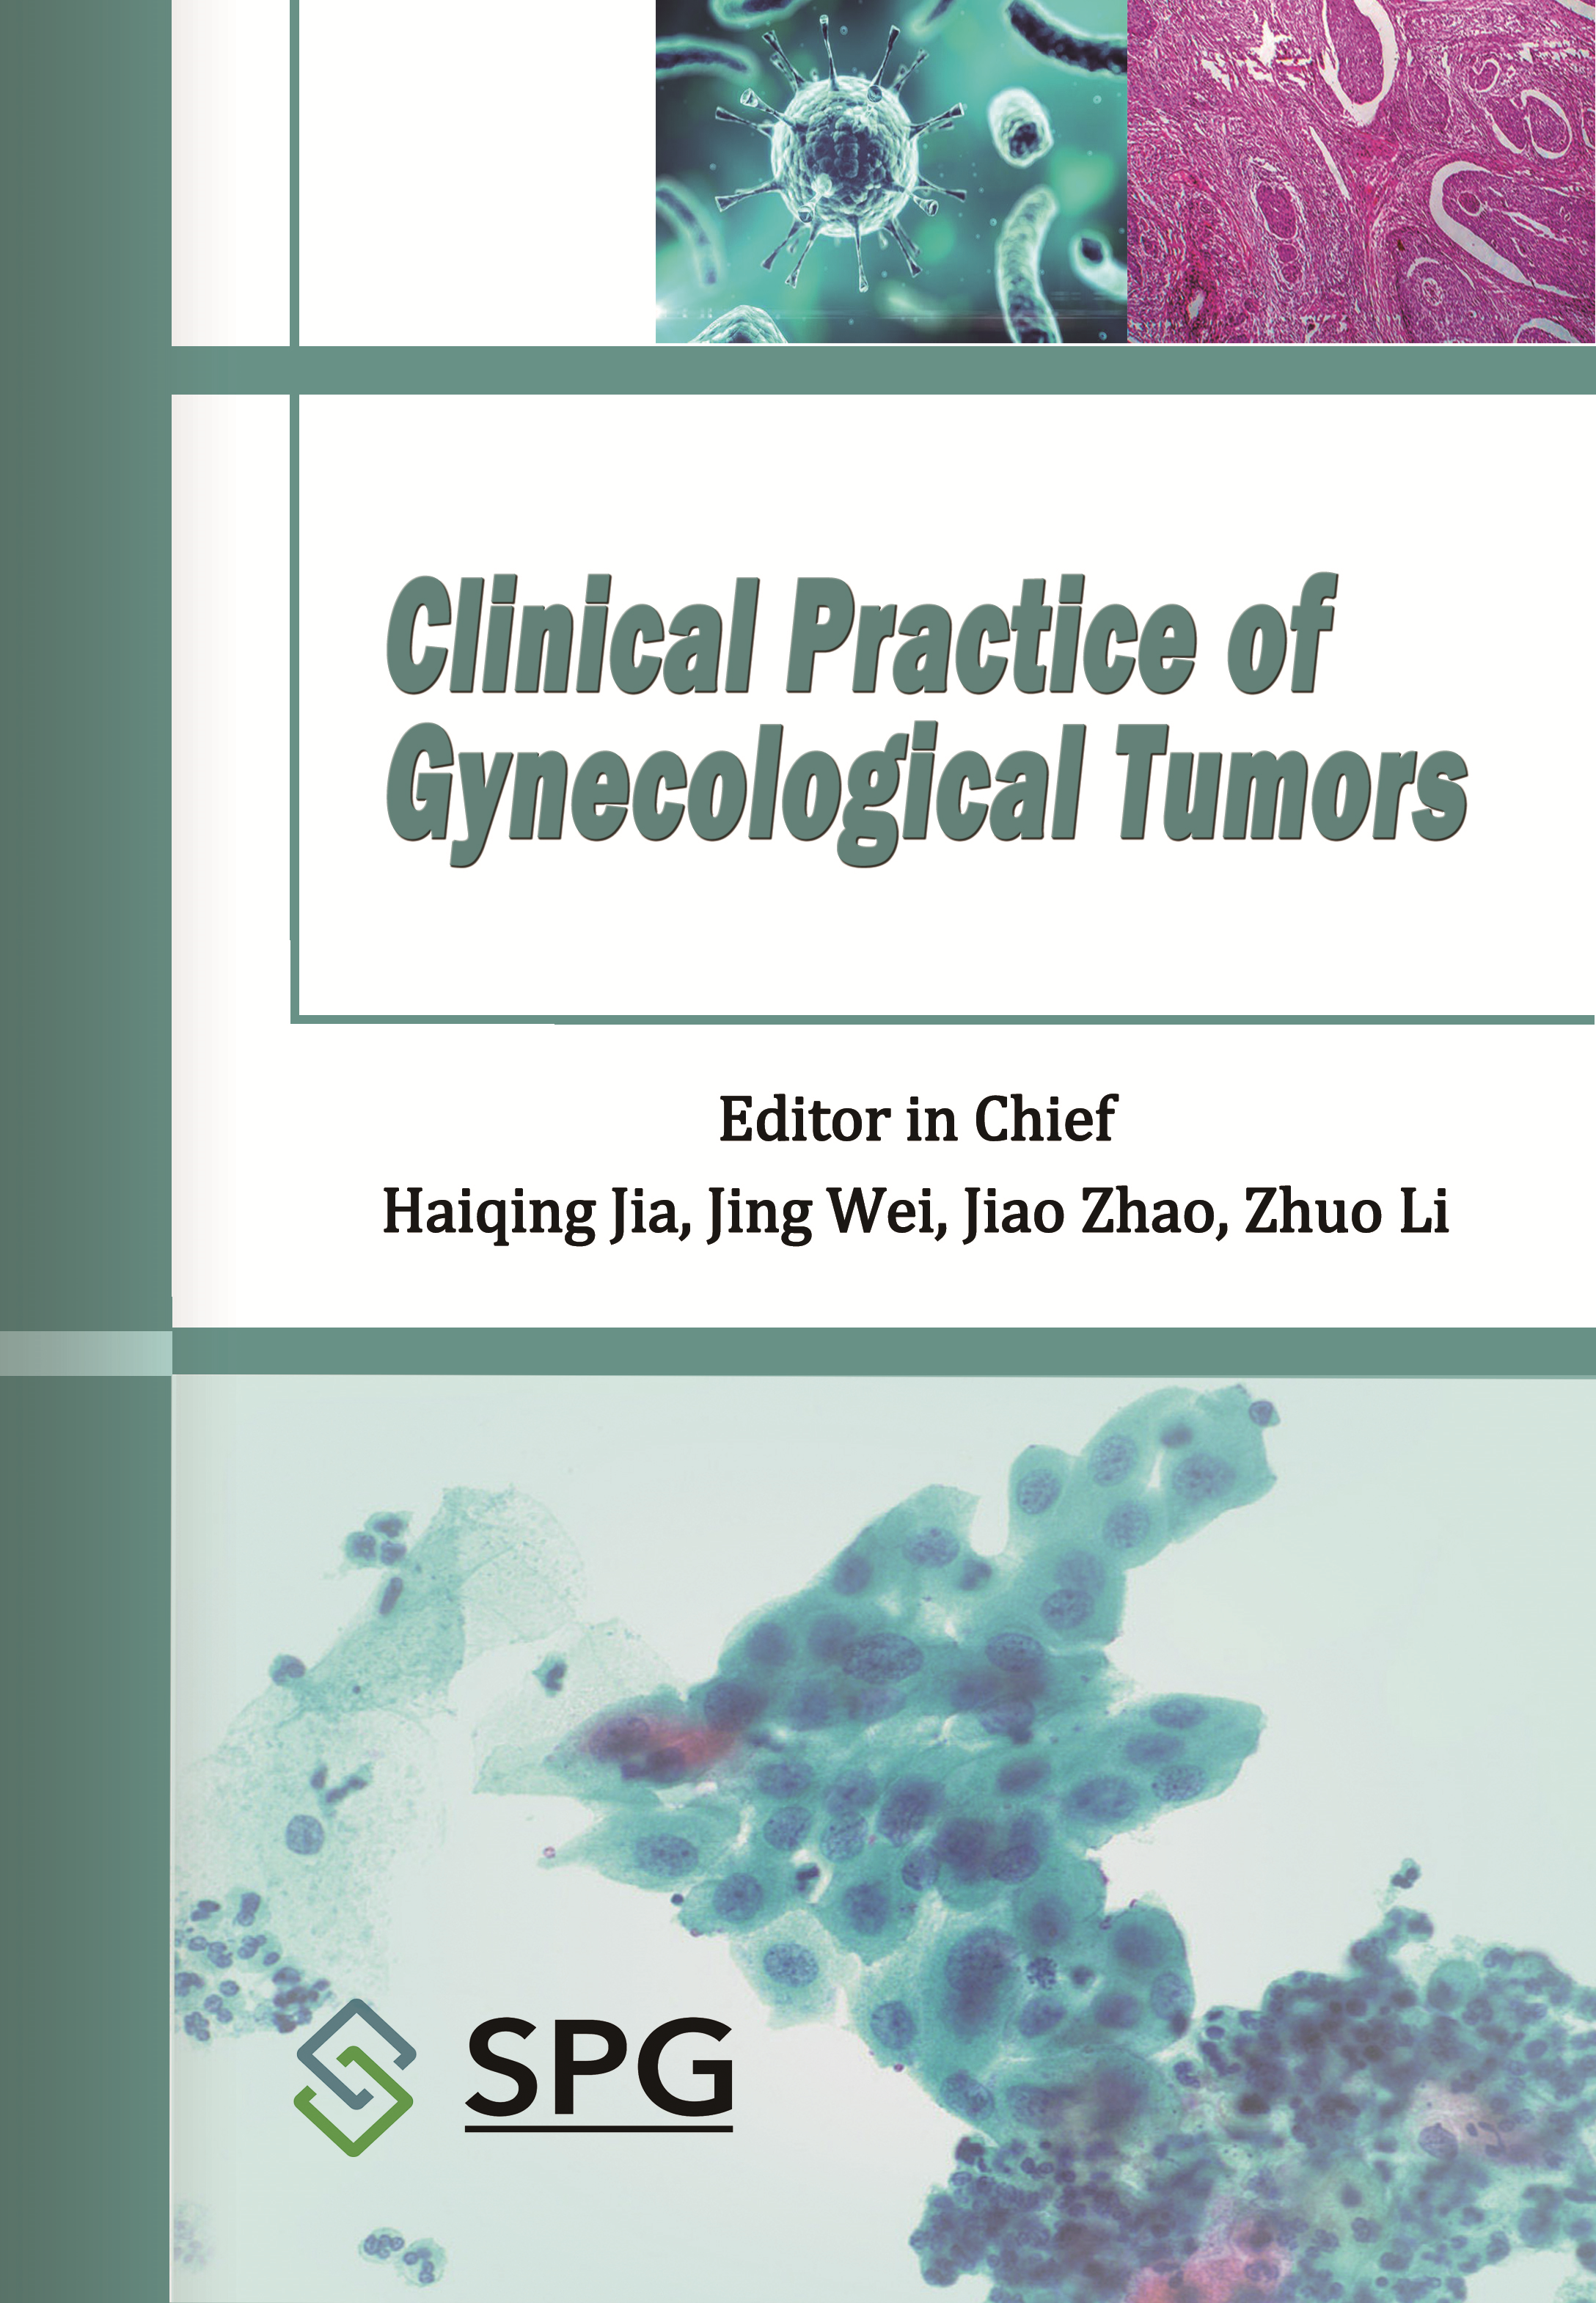 Clinical Practice of Gynecological Tumors | Scholar Publishing Group